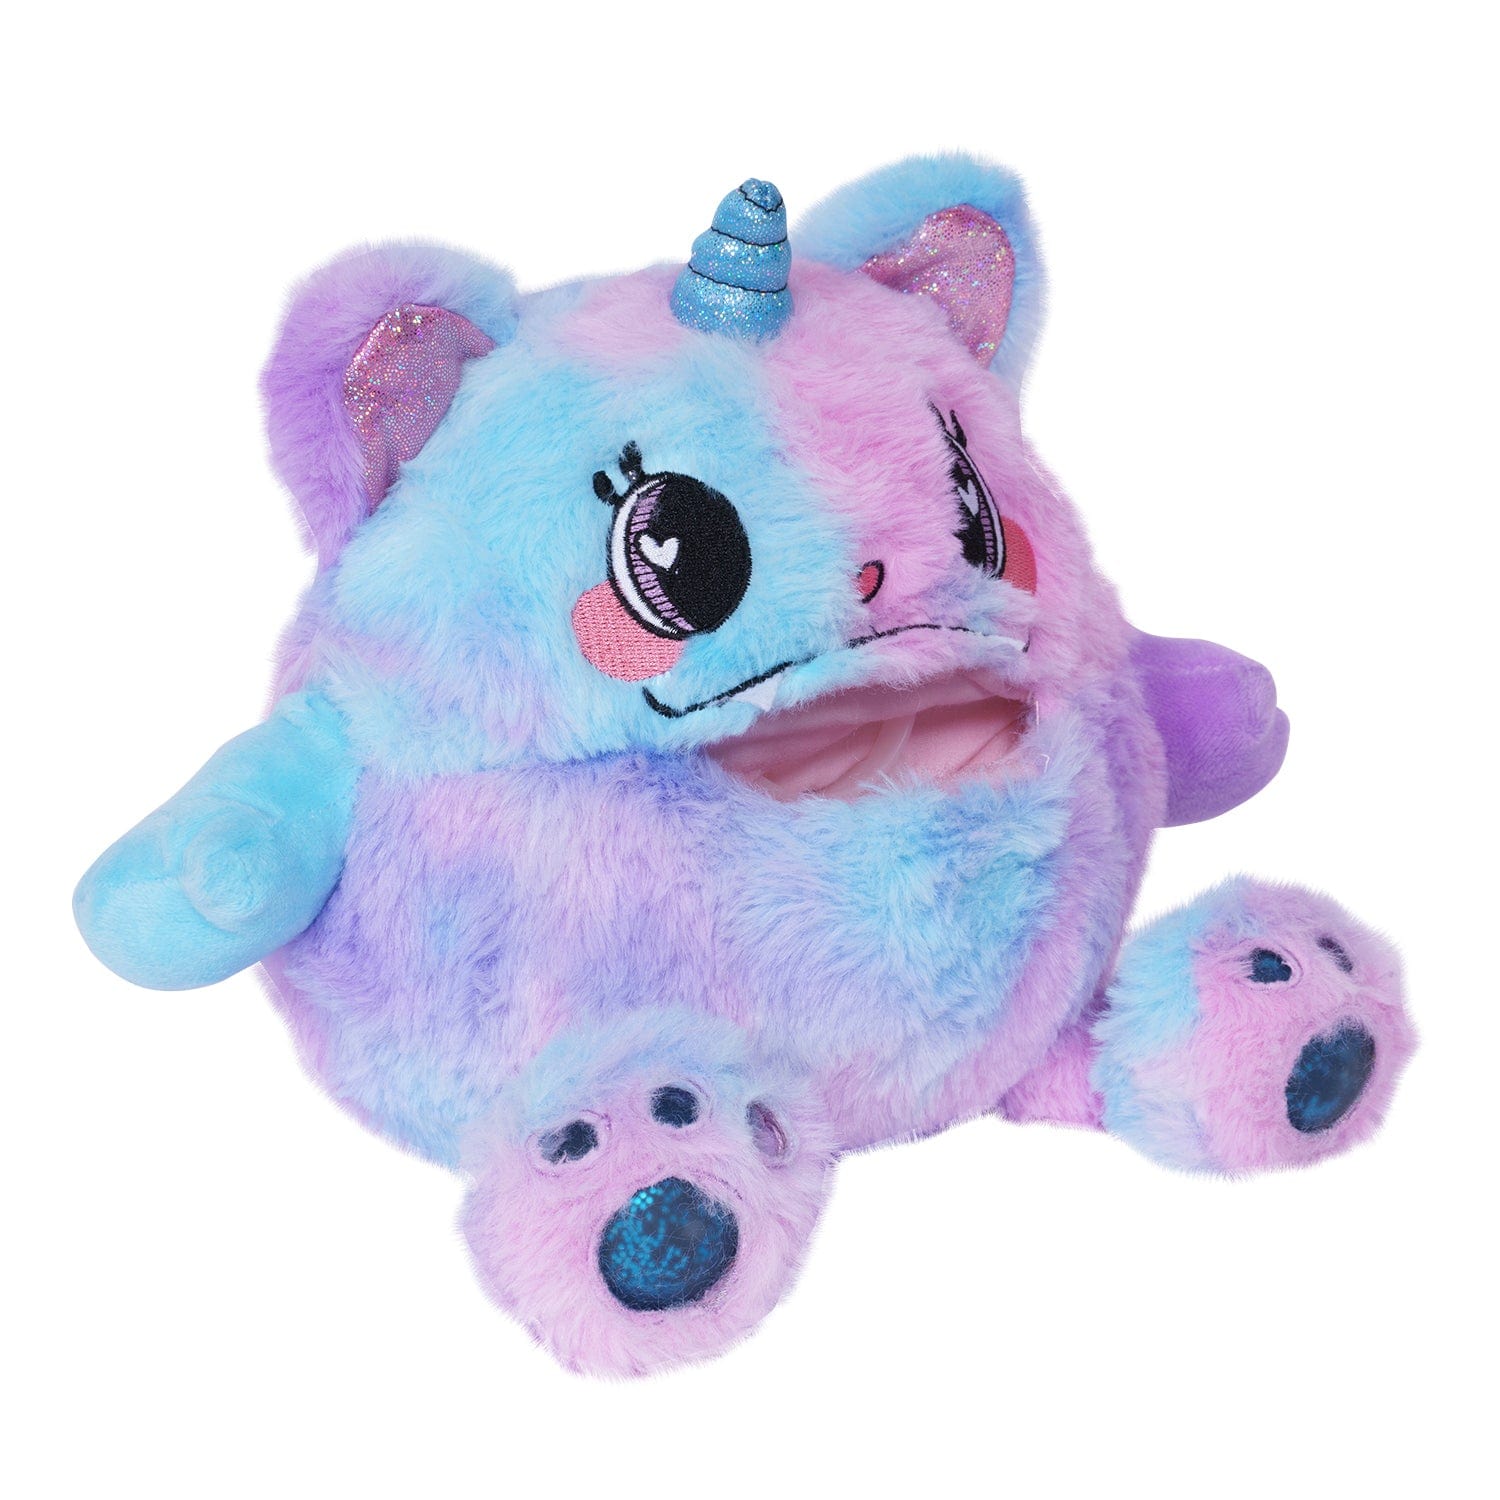 Adora's Kitty Calm Cuddle Monster cute stuffed animal has ultra-soft faux fur to provide maximum soothing, plus built-in fidget toys in her paws, ears, and tail to provide sensory relief. She has a 1 lb. weighted body to help relieve anxiety and stress, plus her 7